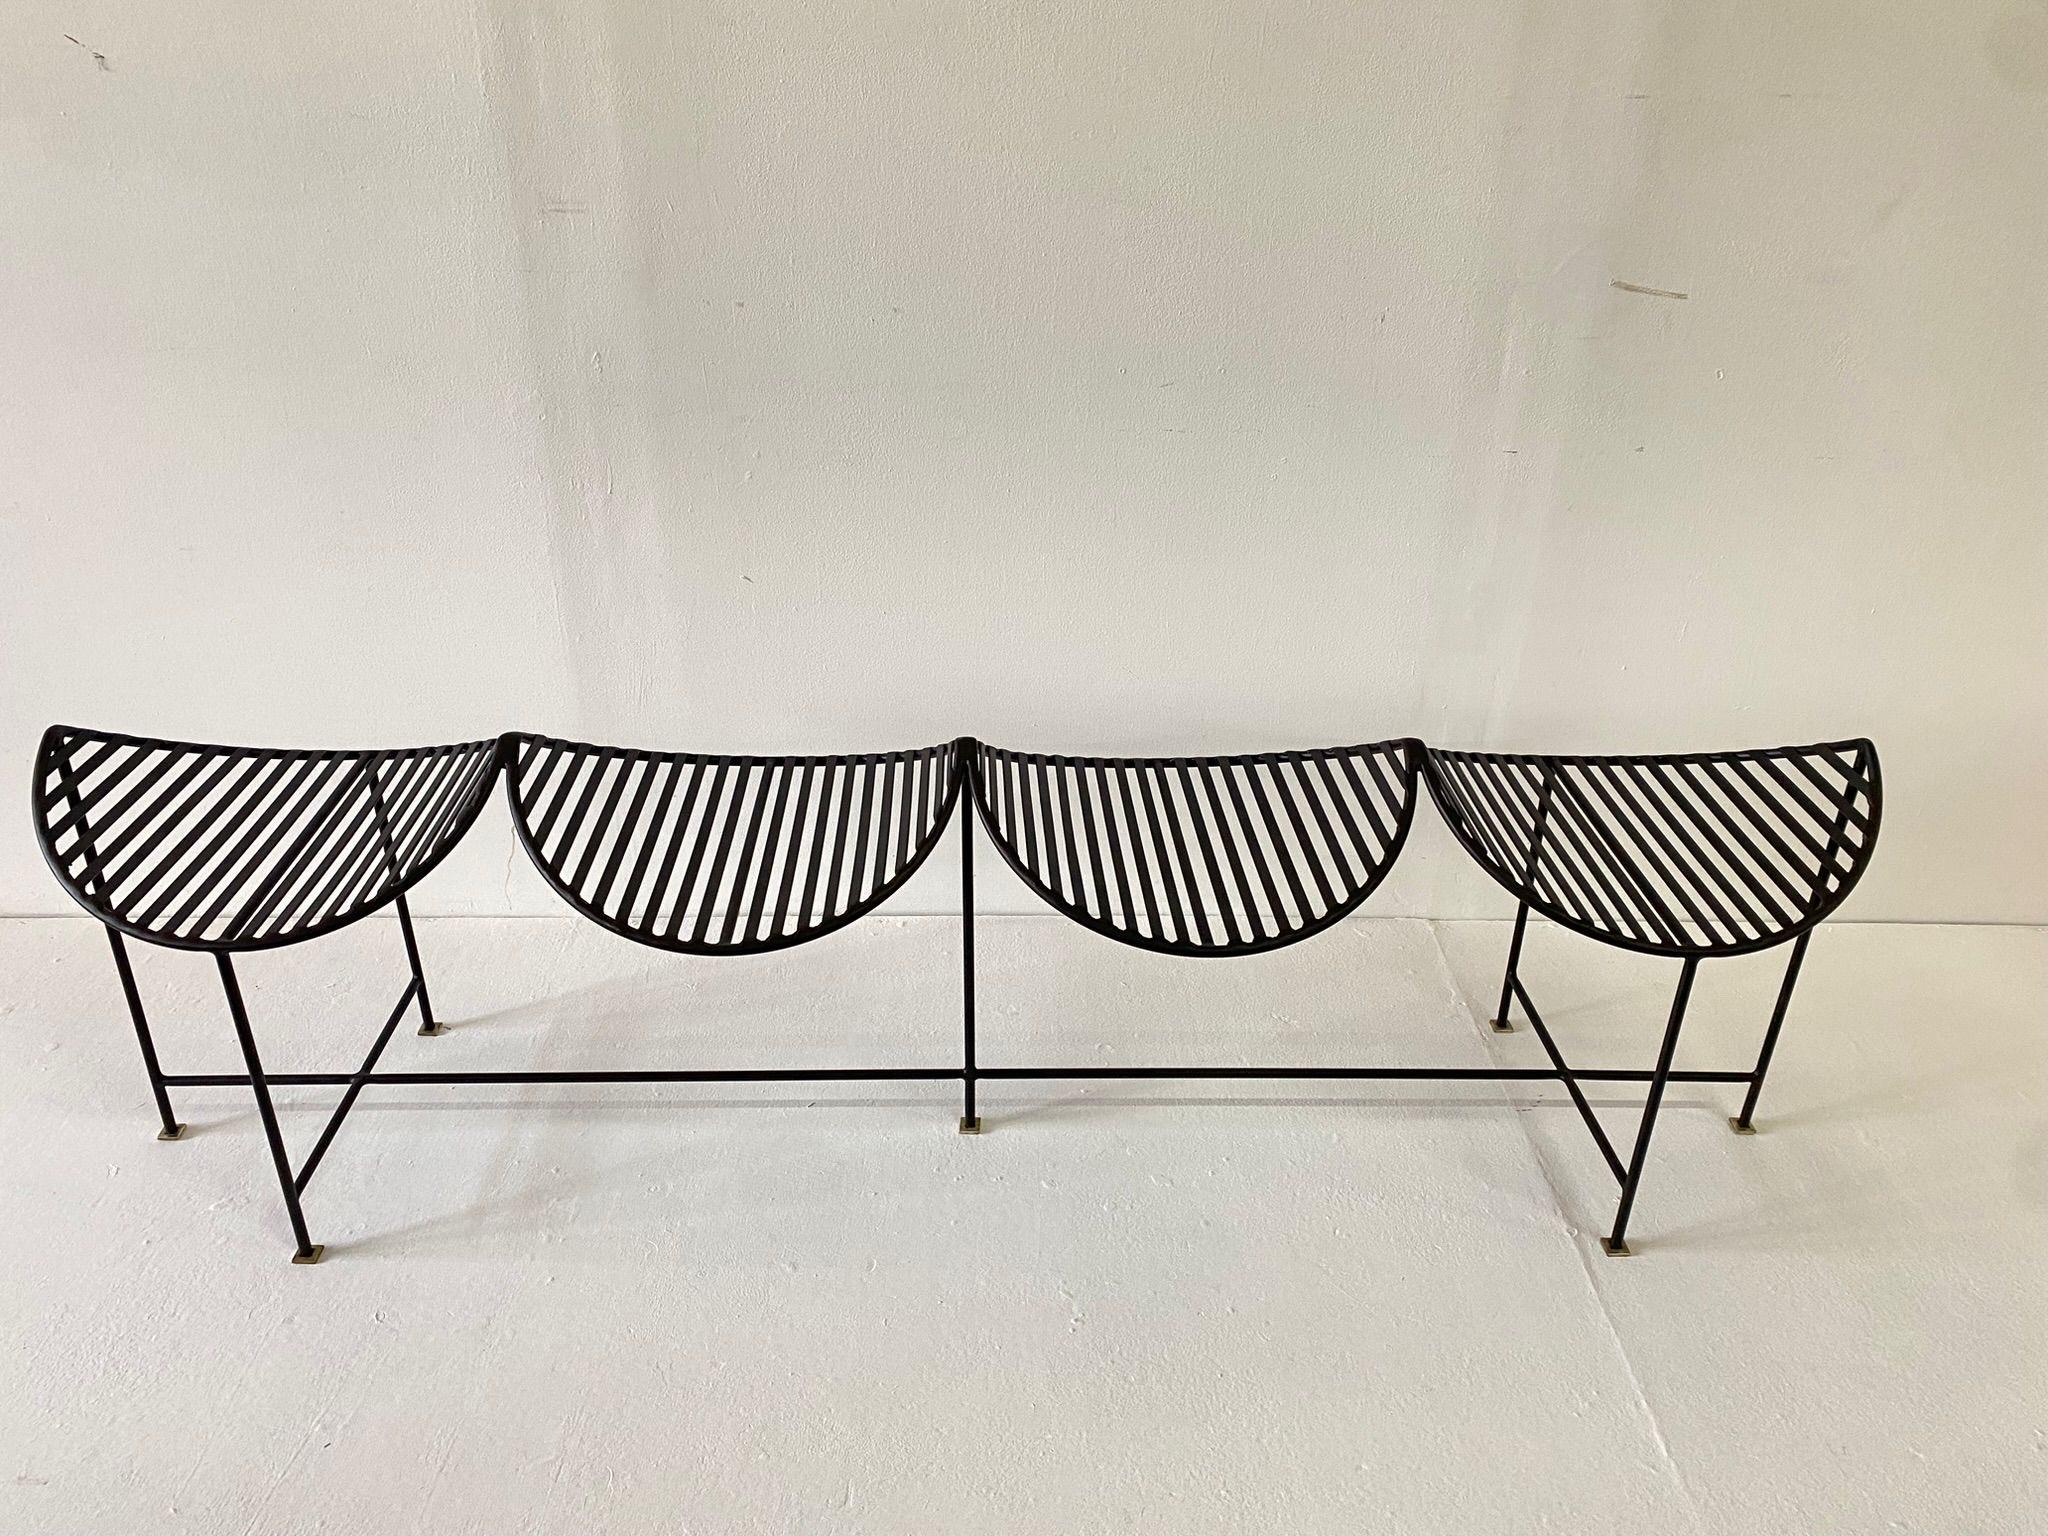 Powder-Coated Iron Four-Seat Powder-coated Bench For Sale